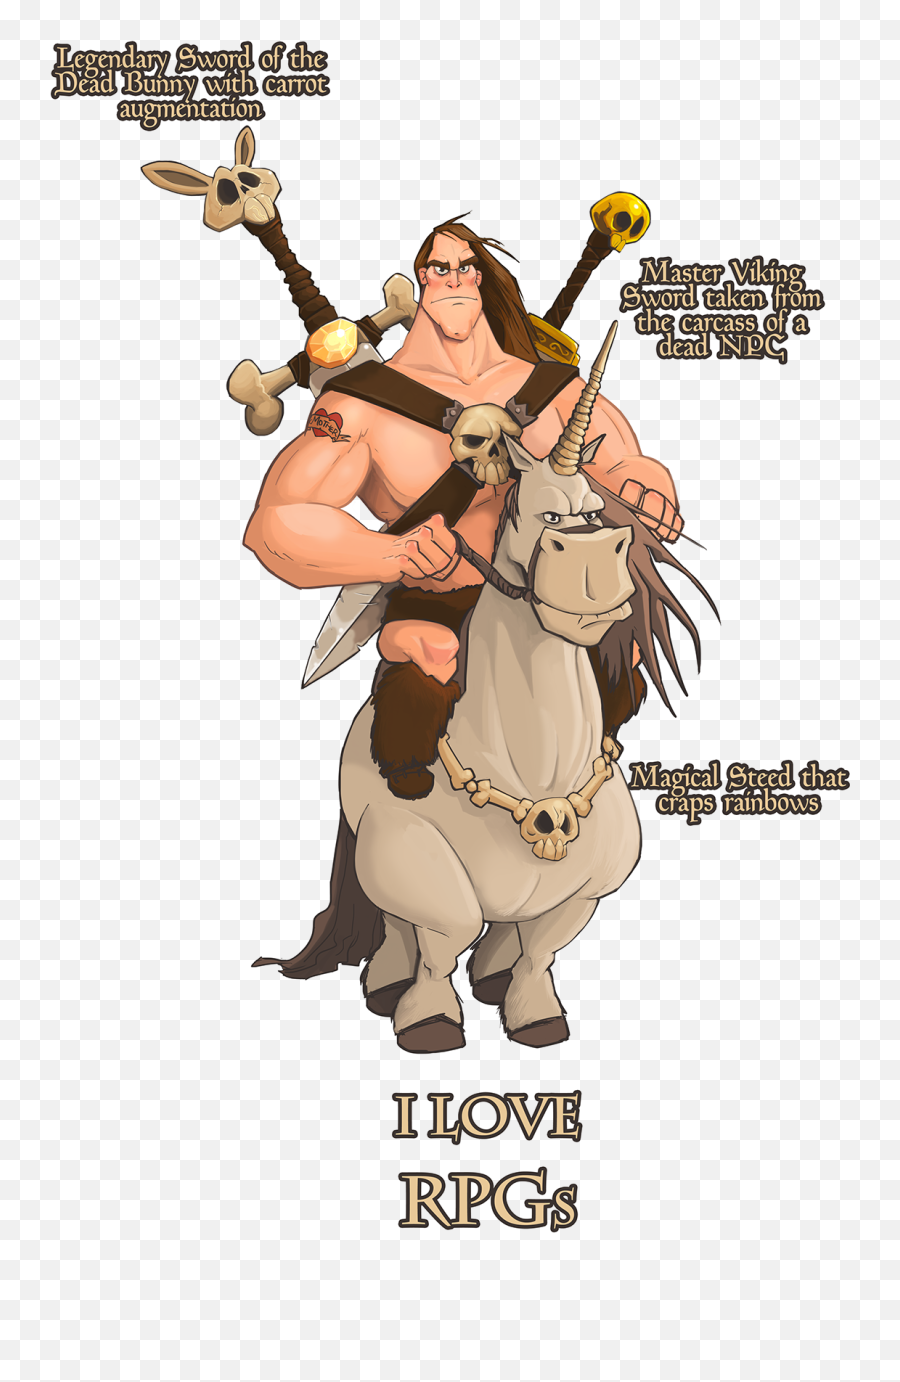 Download Barbarian Warrior - Full Size Png Image Pngkit Barbarian Warrior,Barbarian Png